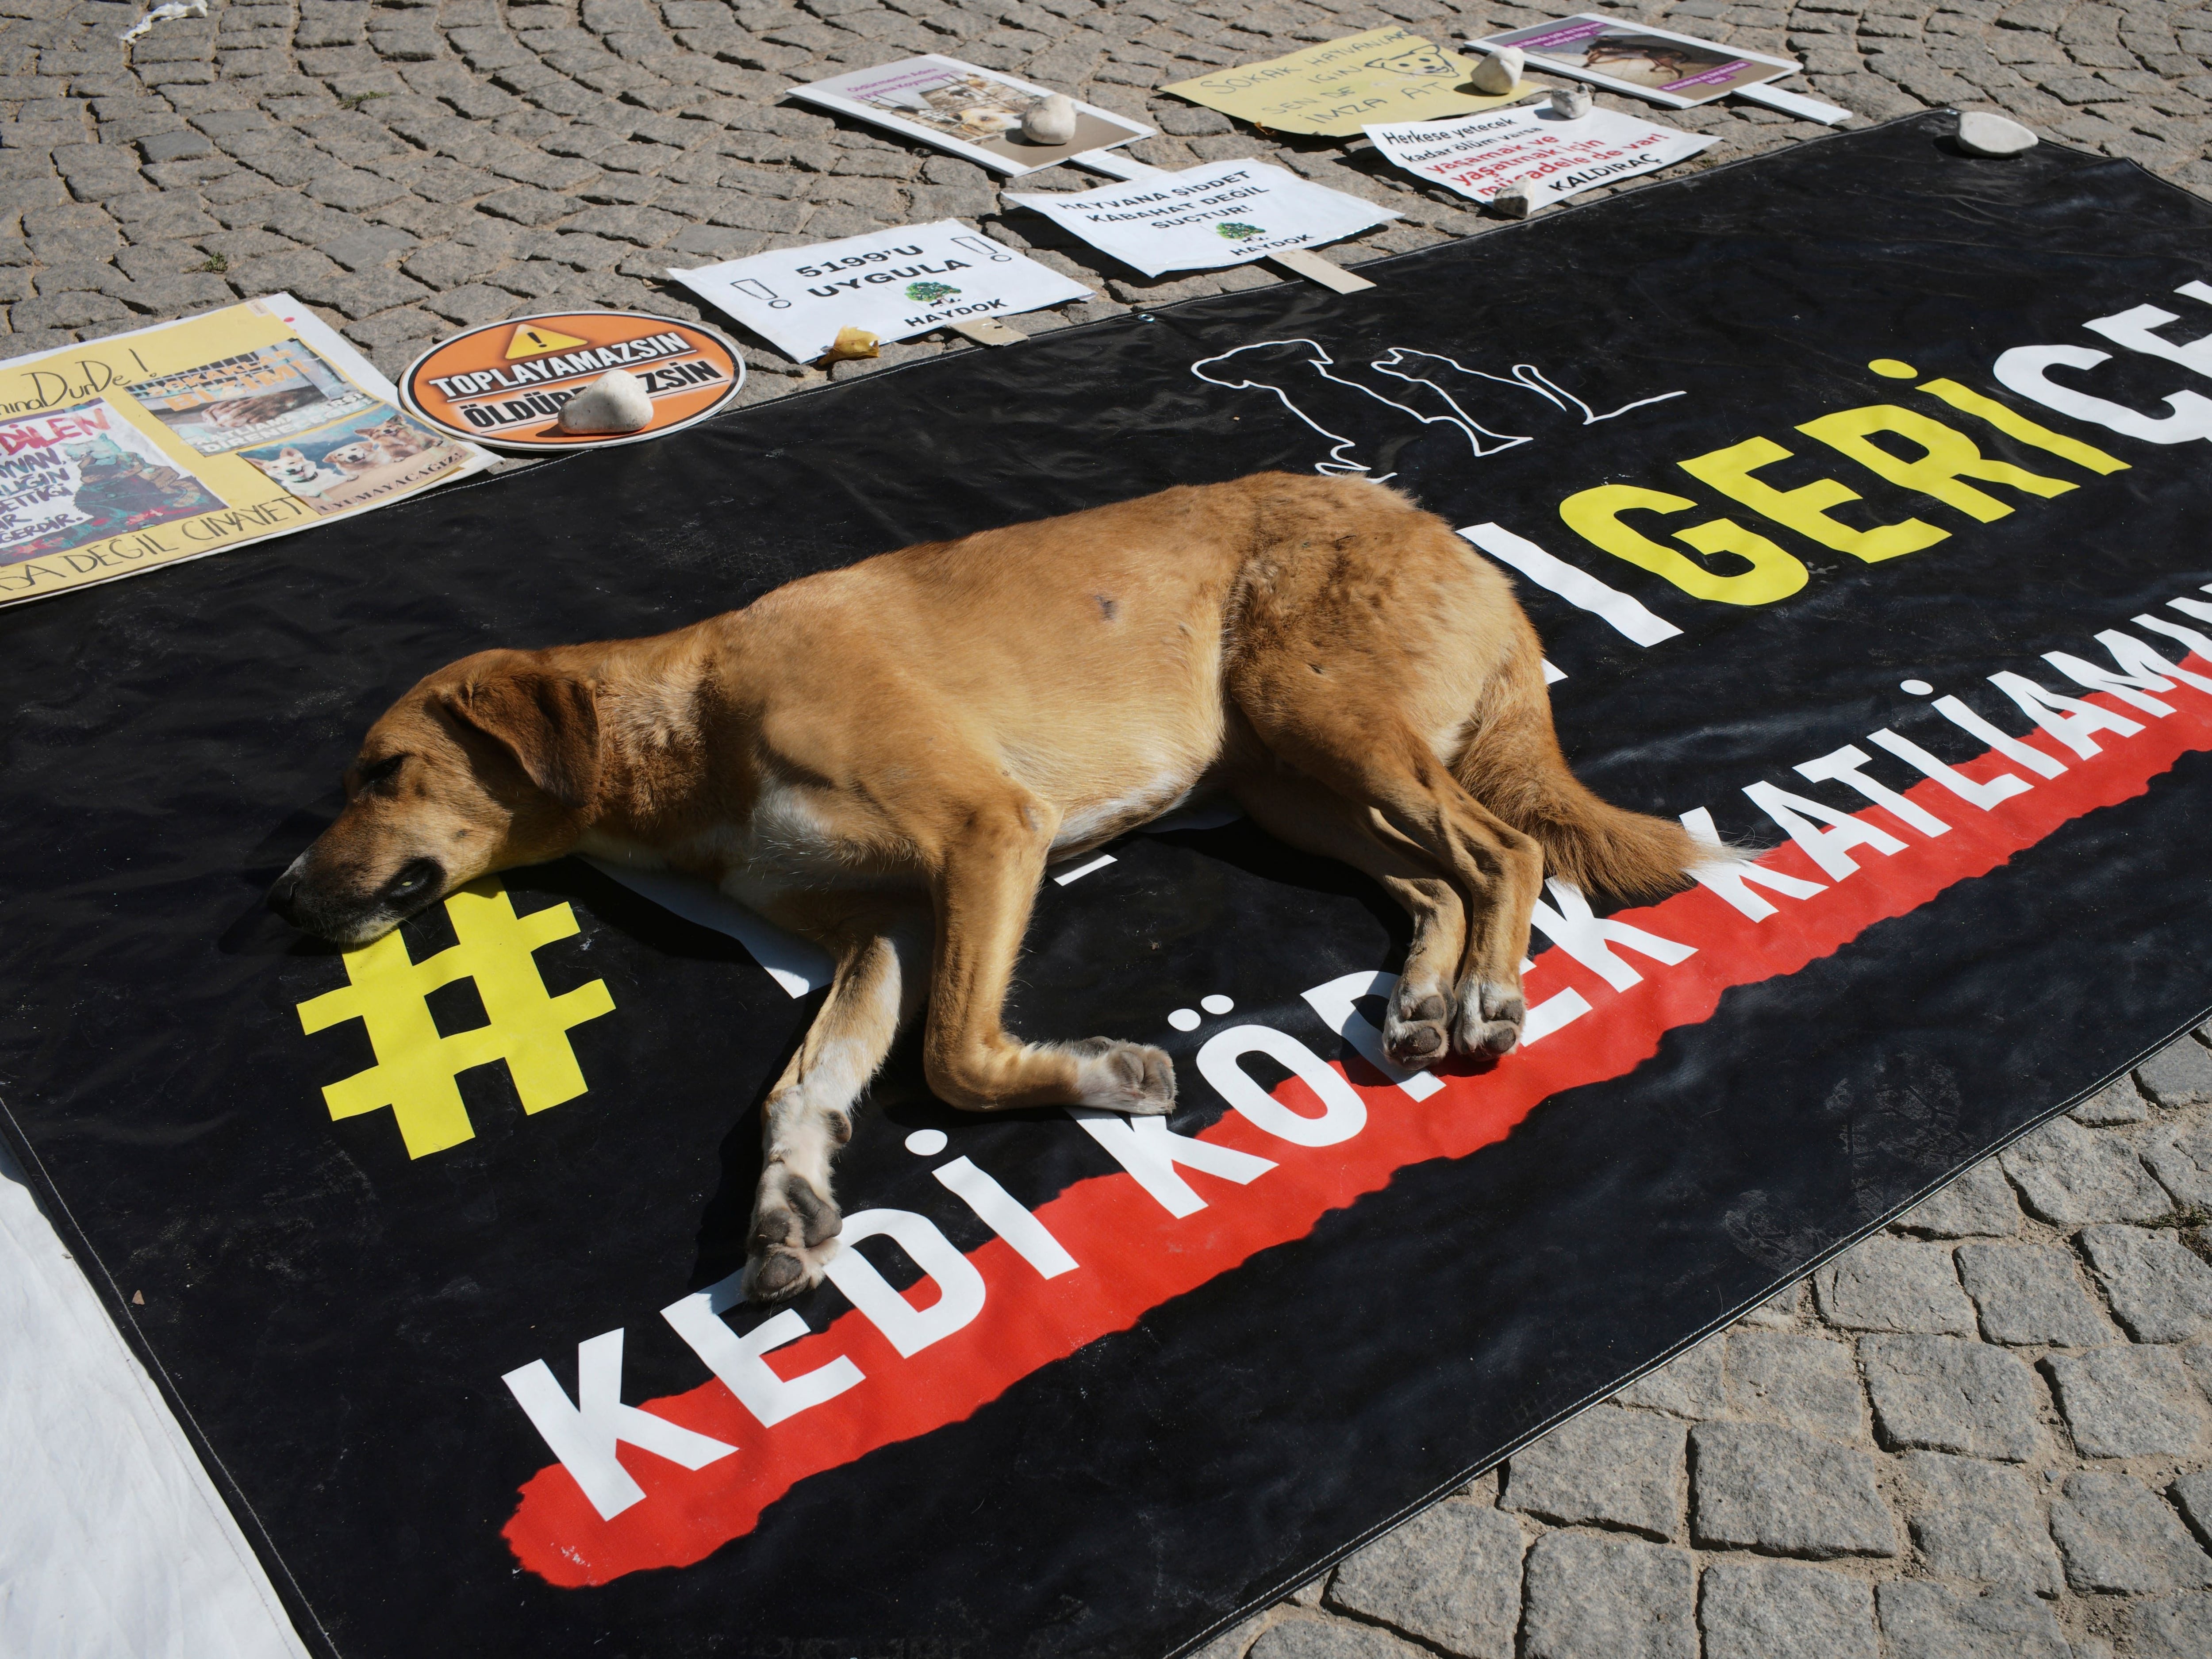 Turkish assembly clears way for ‘massacre law’ to round up stray dogs